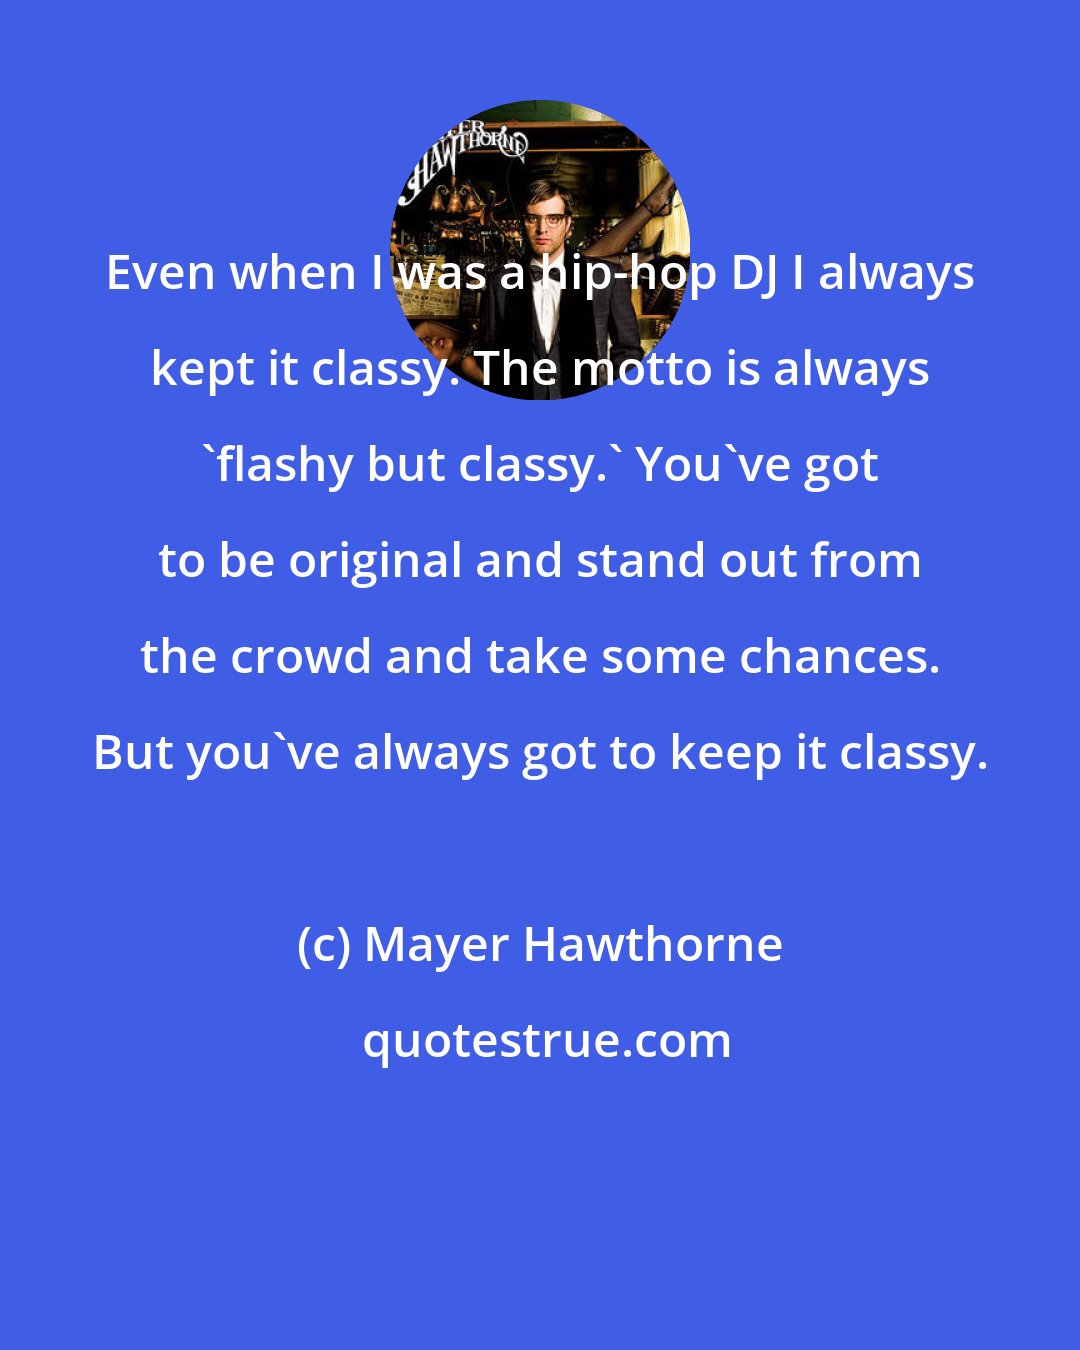 Mayer Hawthorne: Even when I was a hip-hop DJ I always kept it classy. The motto is always 'flashy but classy.' You've got to be original and stand out from the crowd and take some chances. But you've always got to keep it classy.